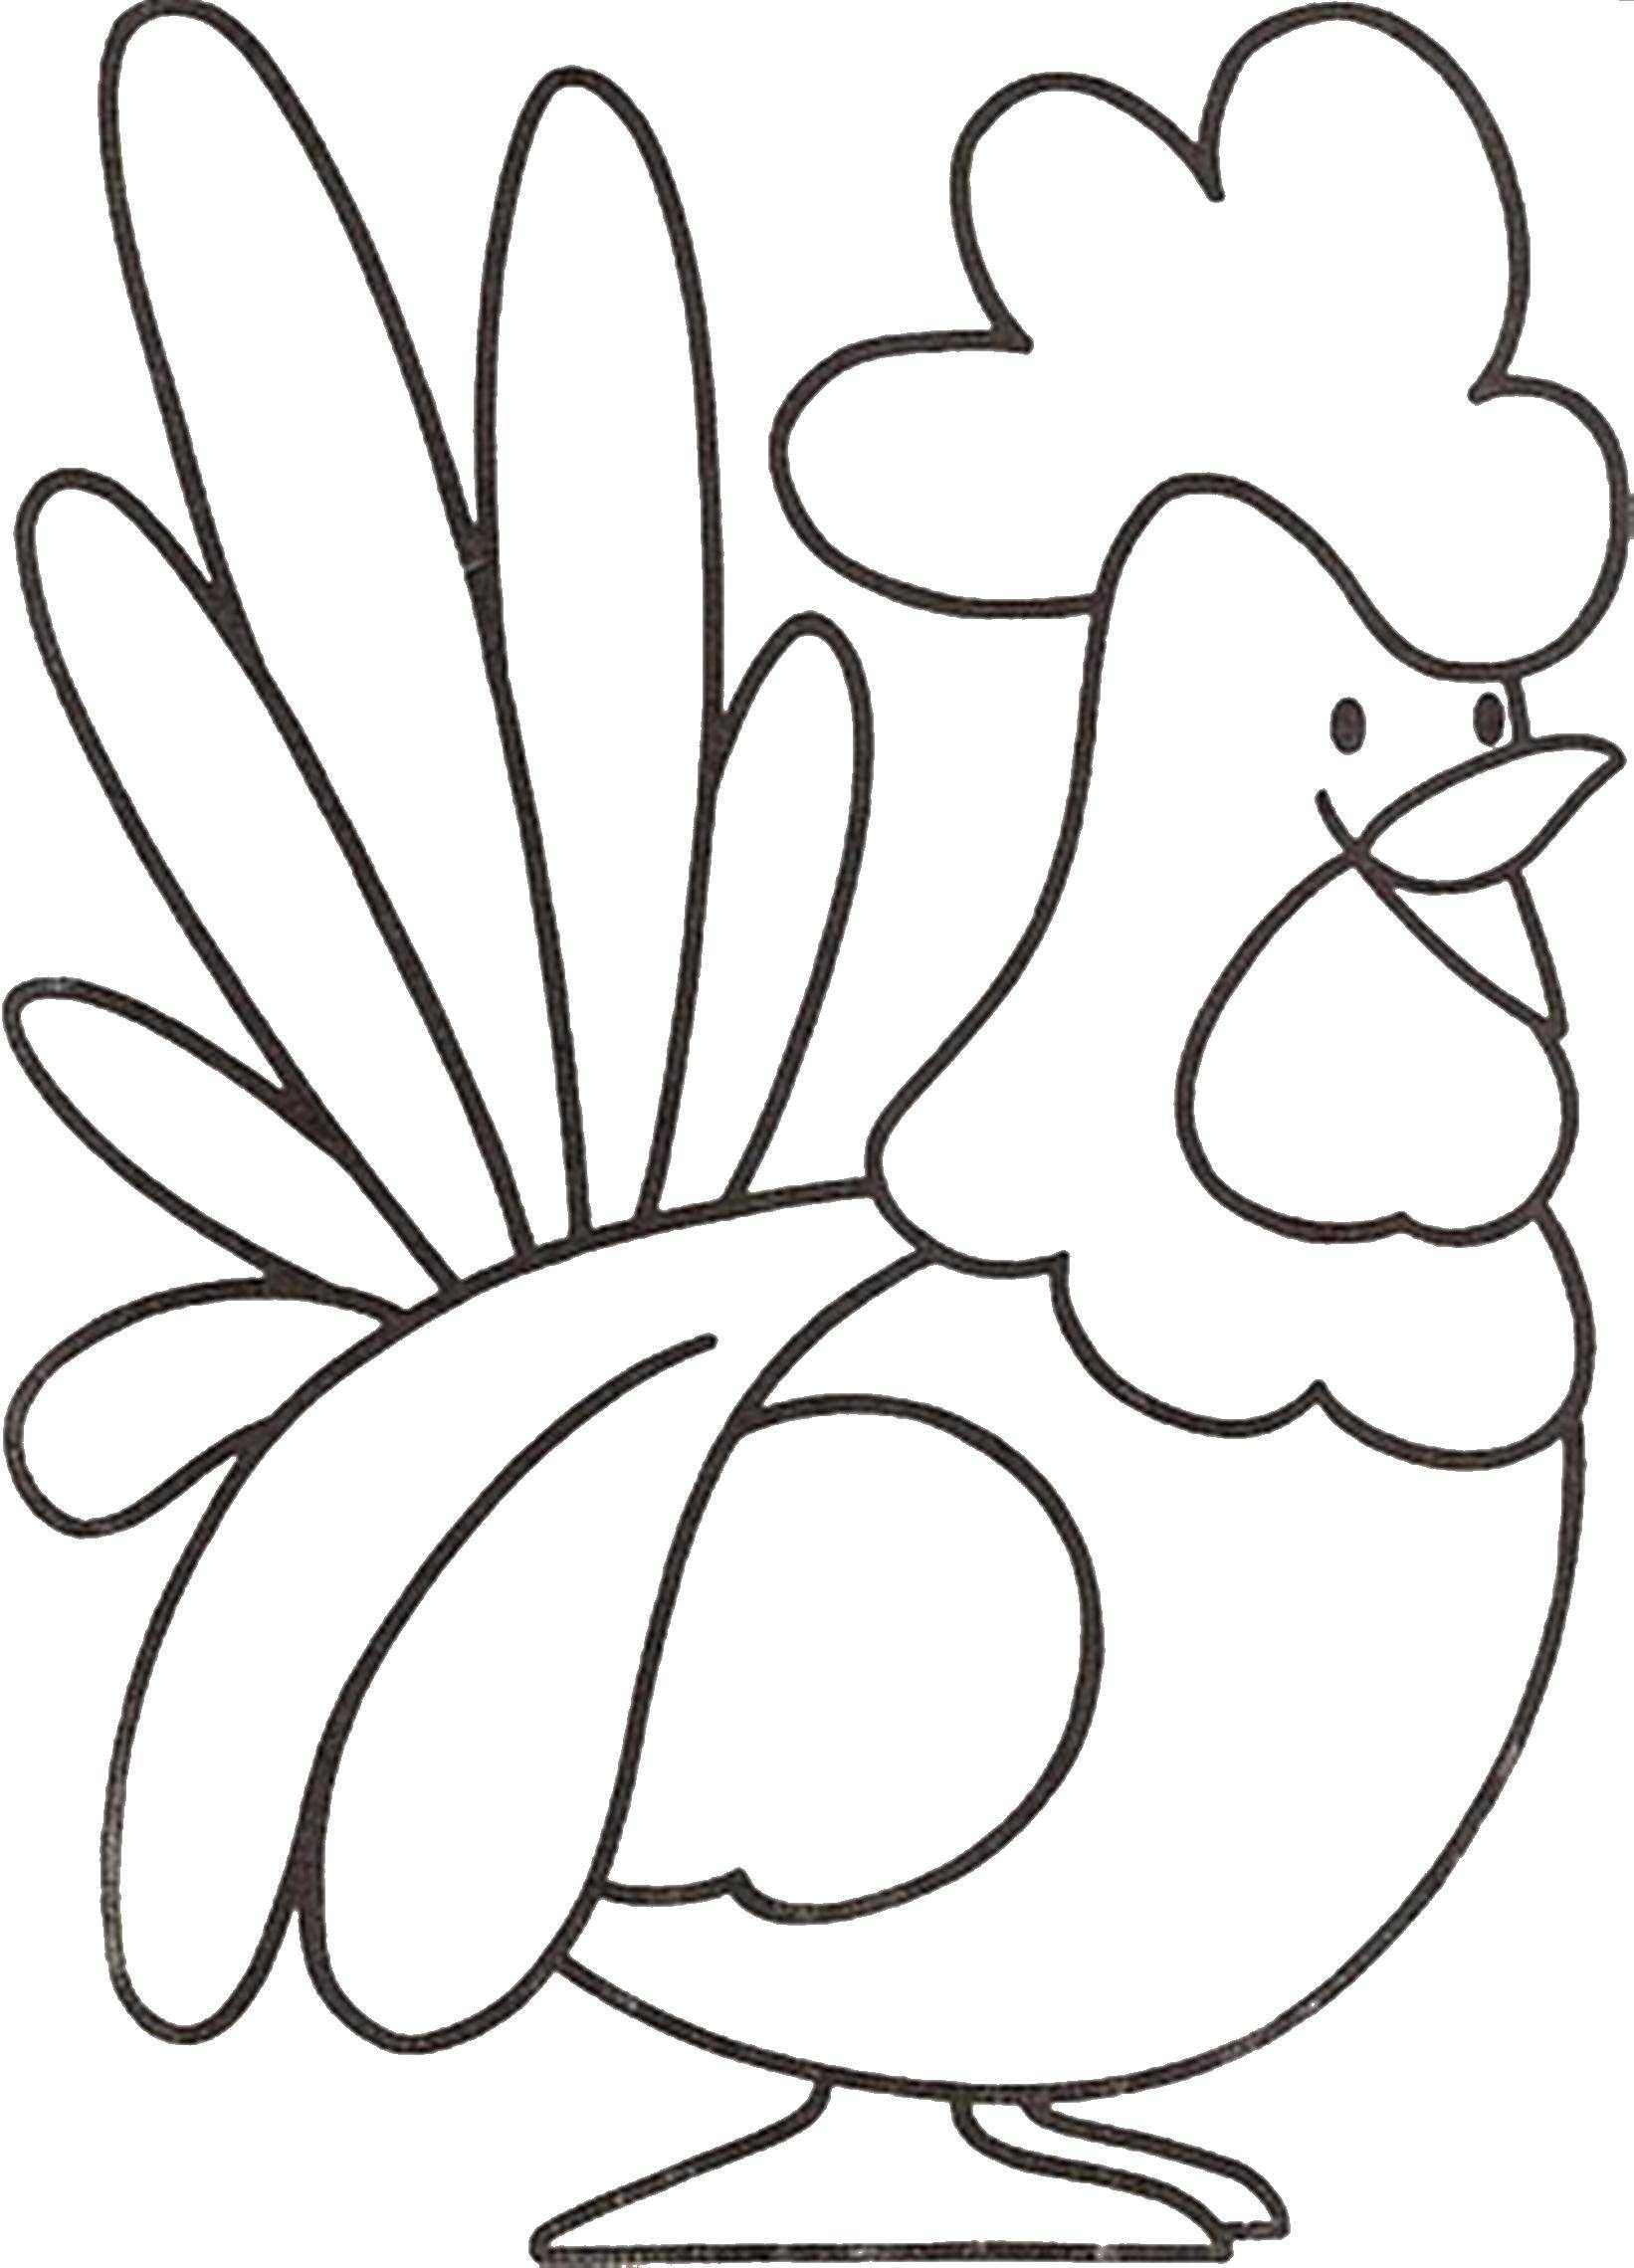 Coloring Cock. Category animals. Tags:  the cock.